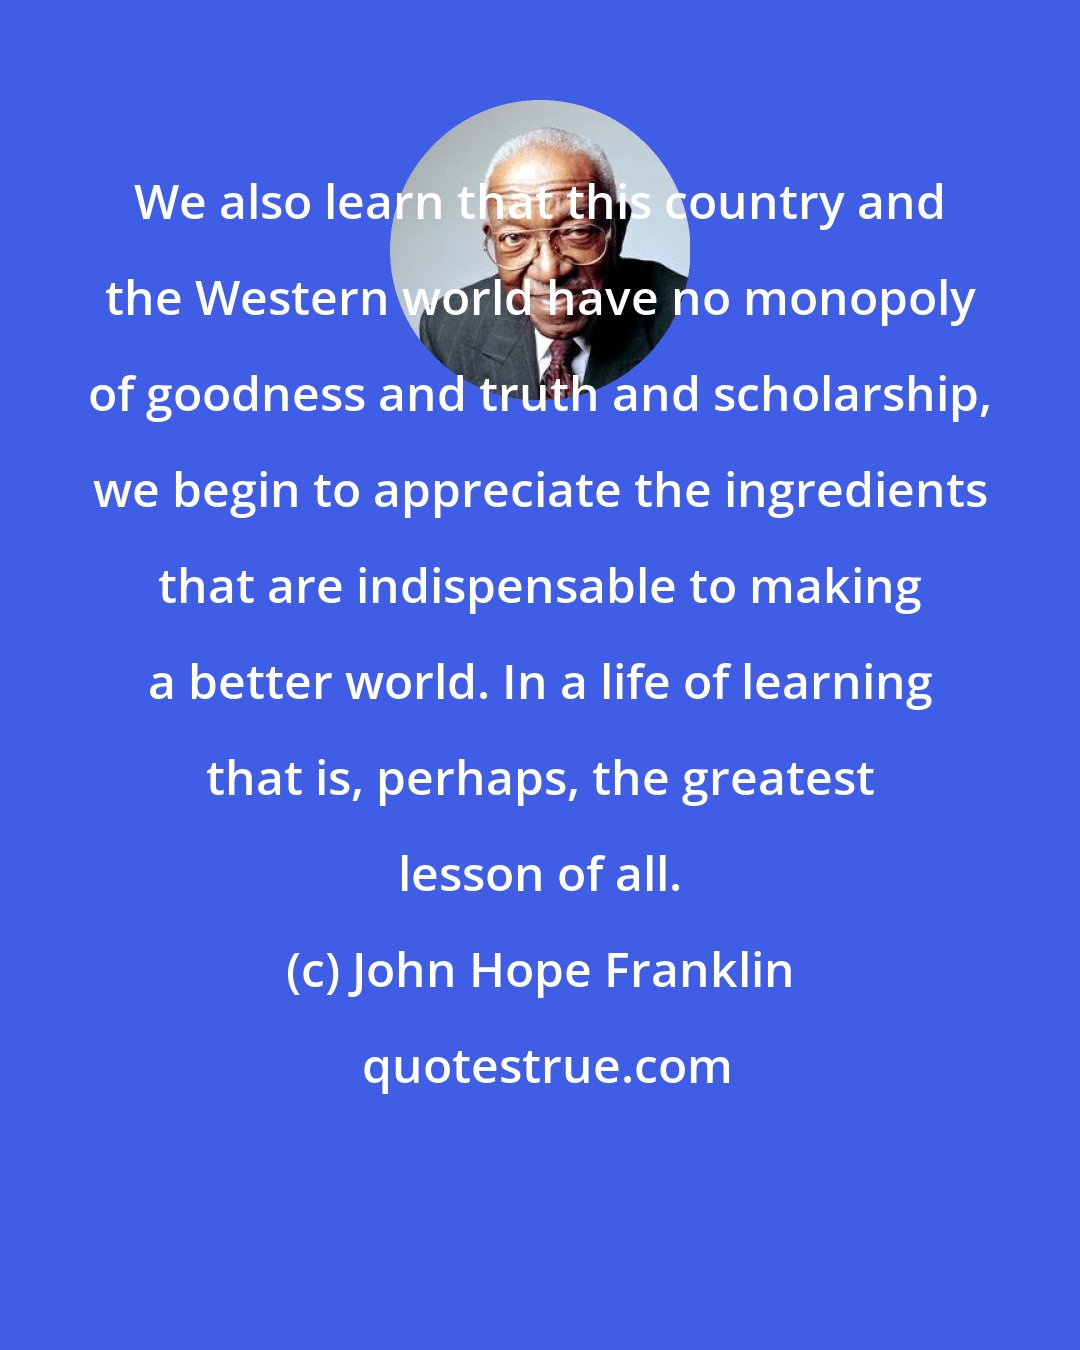 John Hope Franklin: We also learn that this country and the Western world have no monopoly of goodness and truth and scholarship, we begin to appreciate the ingredients that are indispensable to making a better world. In a life of learning that is, perhaps, the greatest lesson of all.